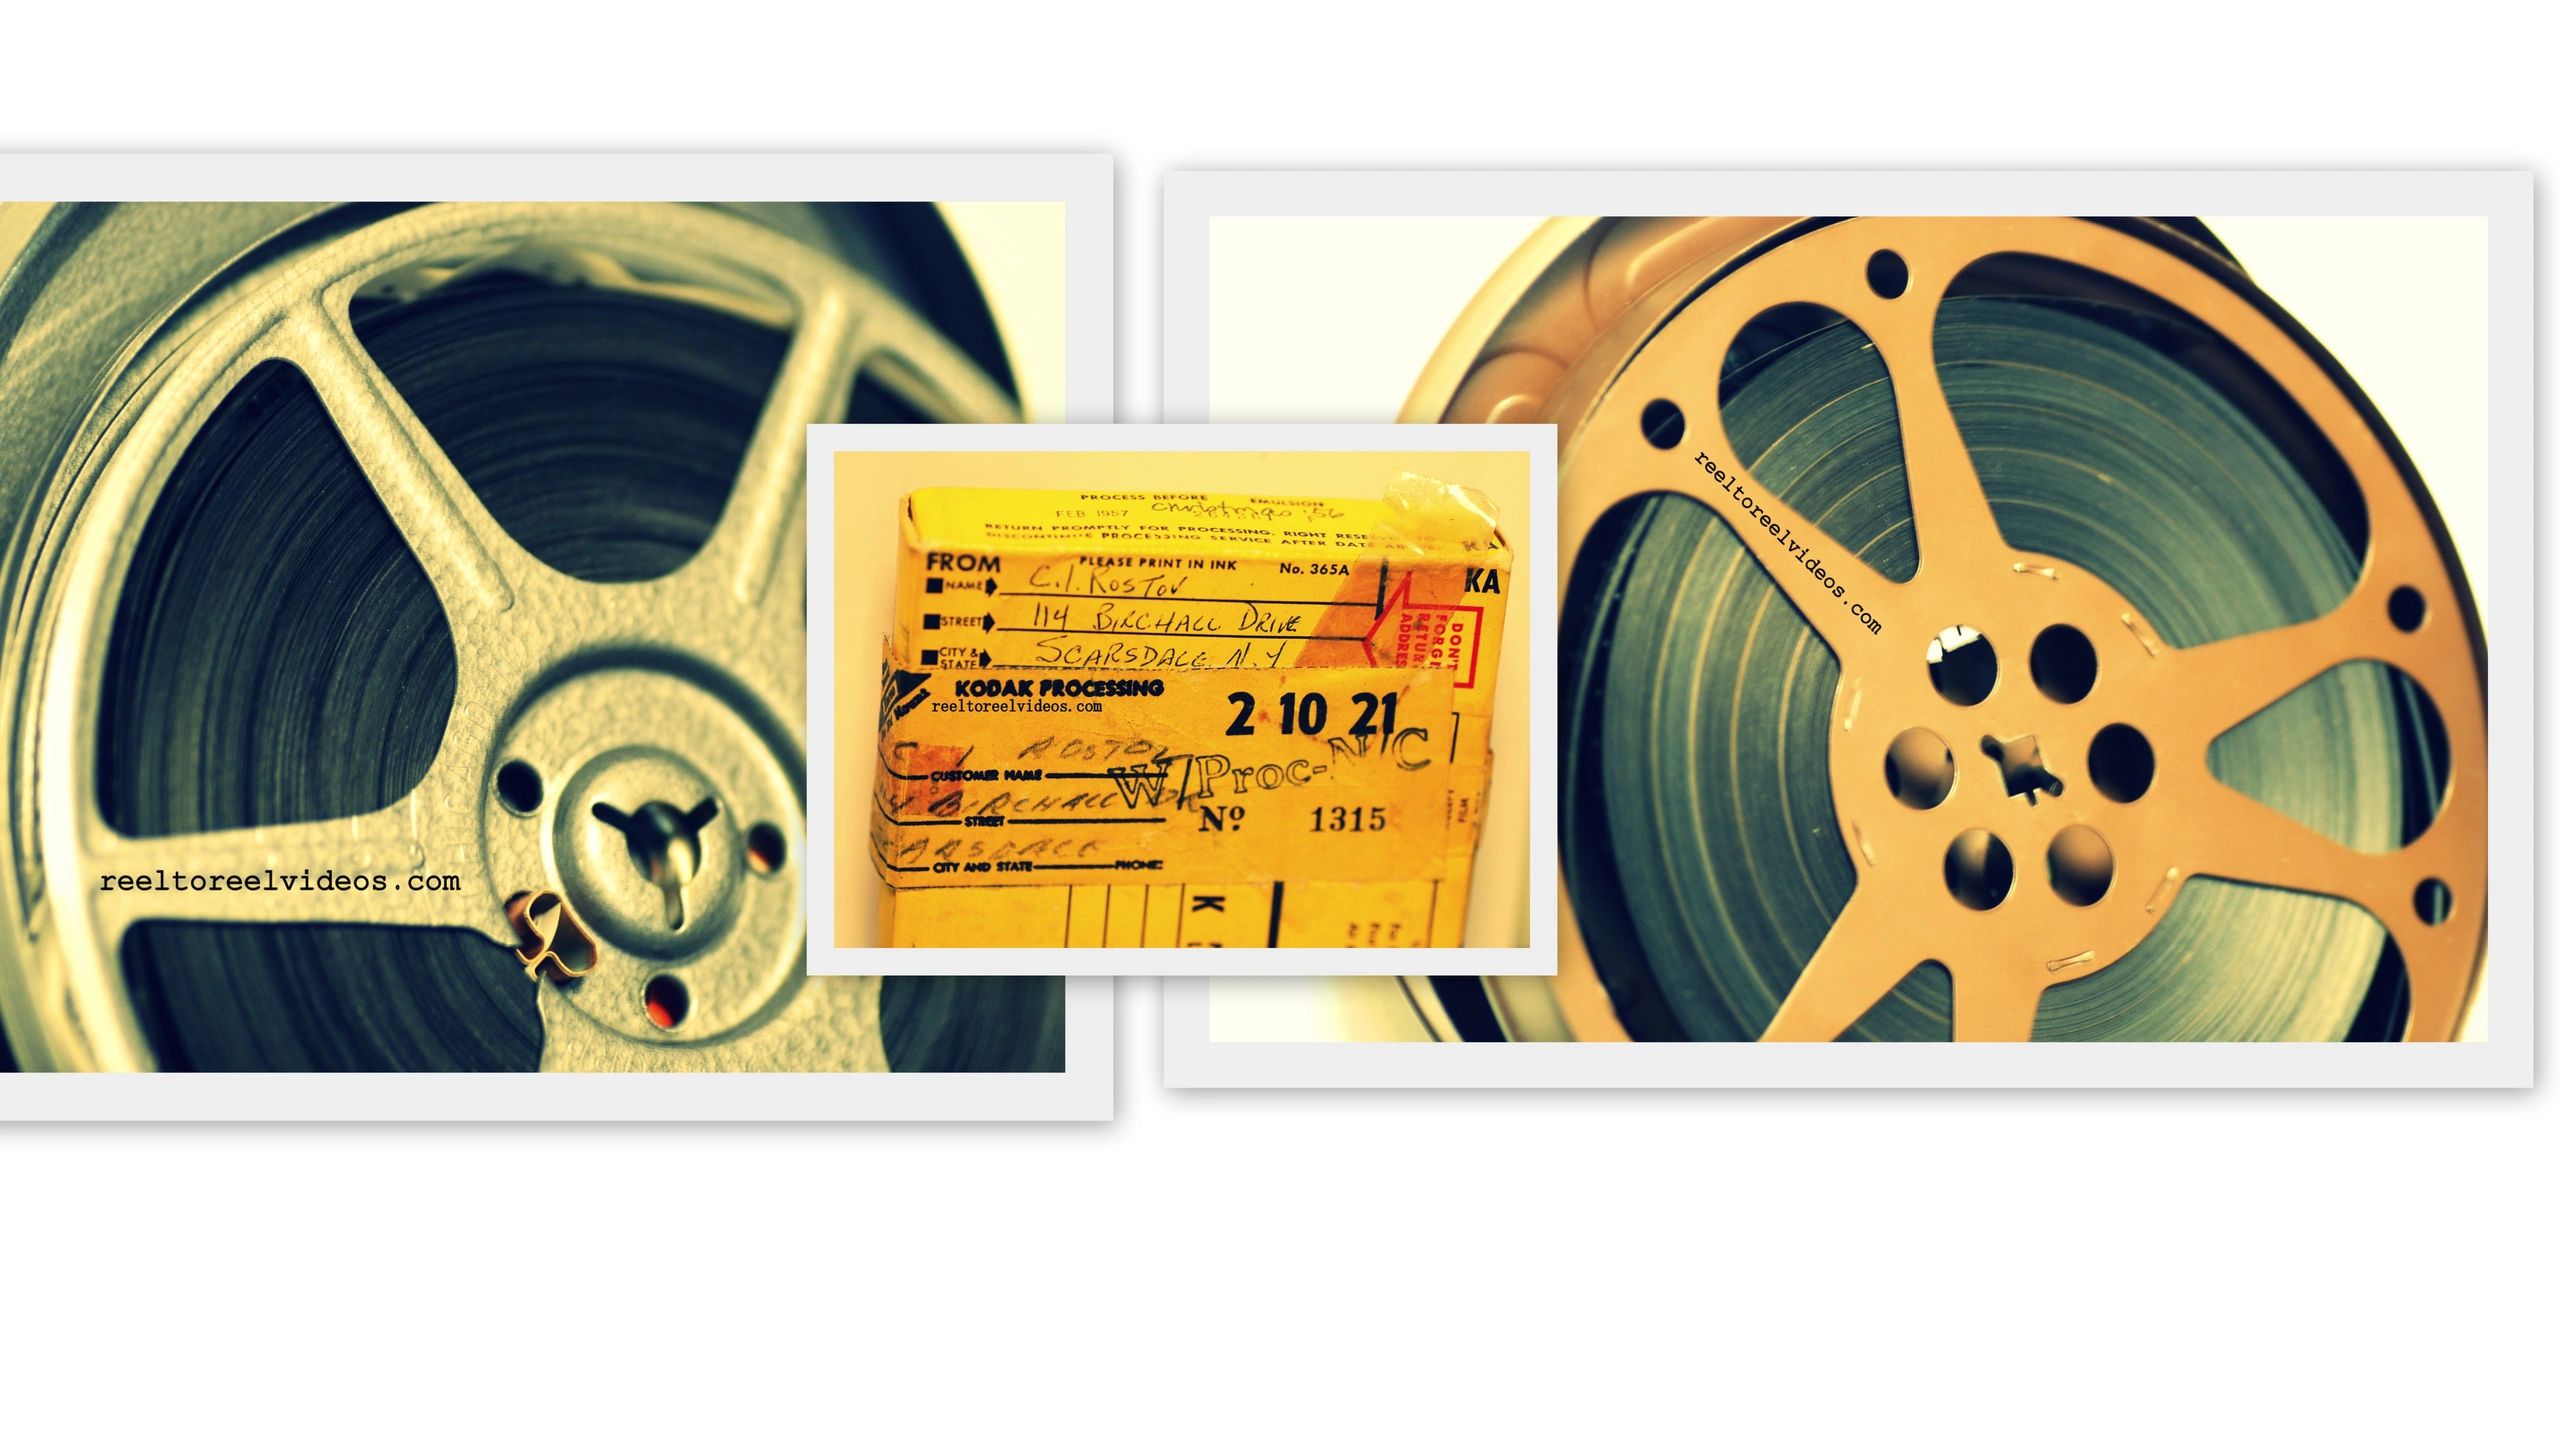 Tape, Film, Slides, Photo, Audio Cassette convert to Digital files and DVD  Transfer Services